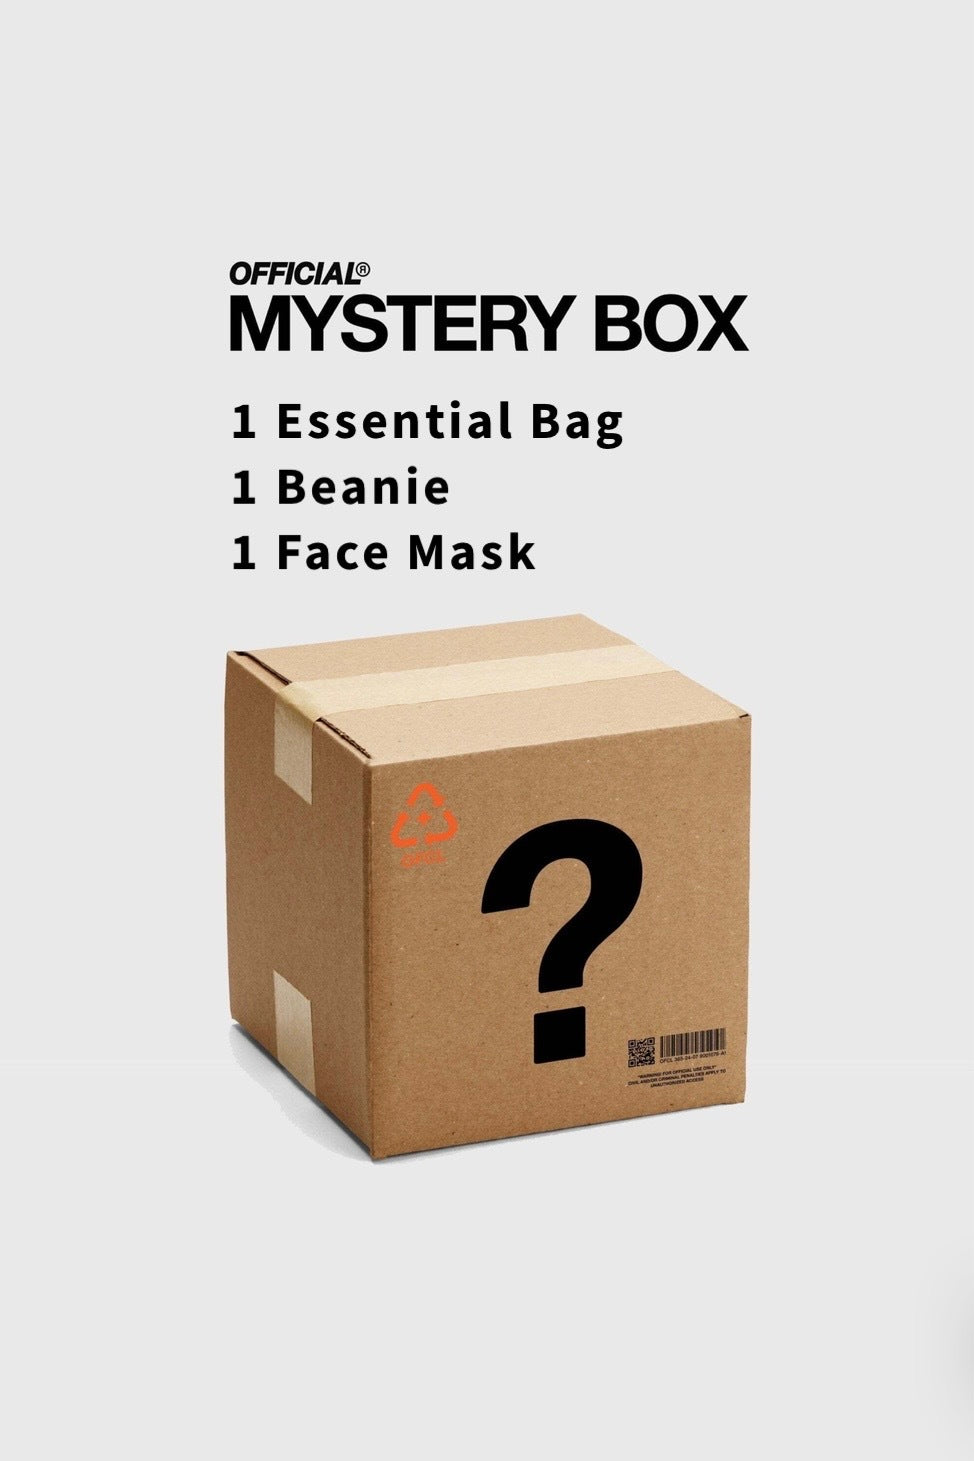 what do the mystery boxes give you? i have yet to open one, i'm